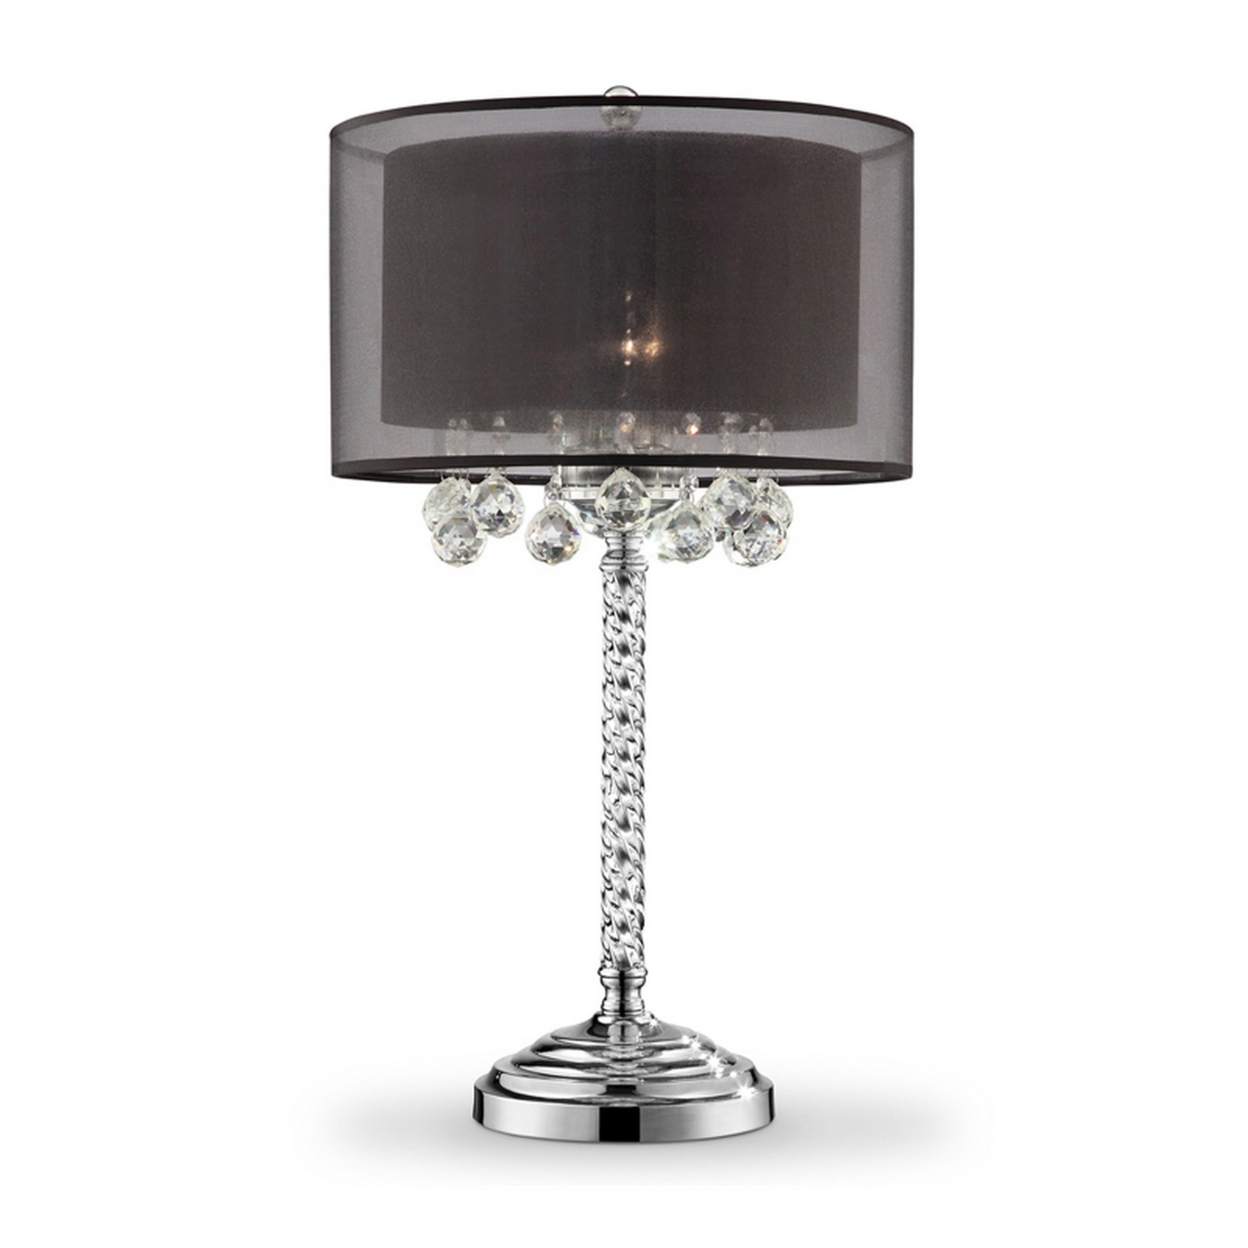 Twisted Crystal Body Table Lamp With Dual Fabric Shade, Clear And Black- Saltoro Sherpi